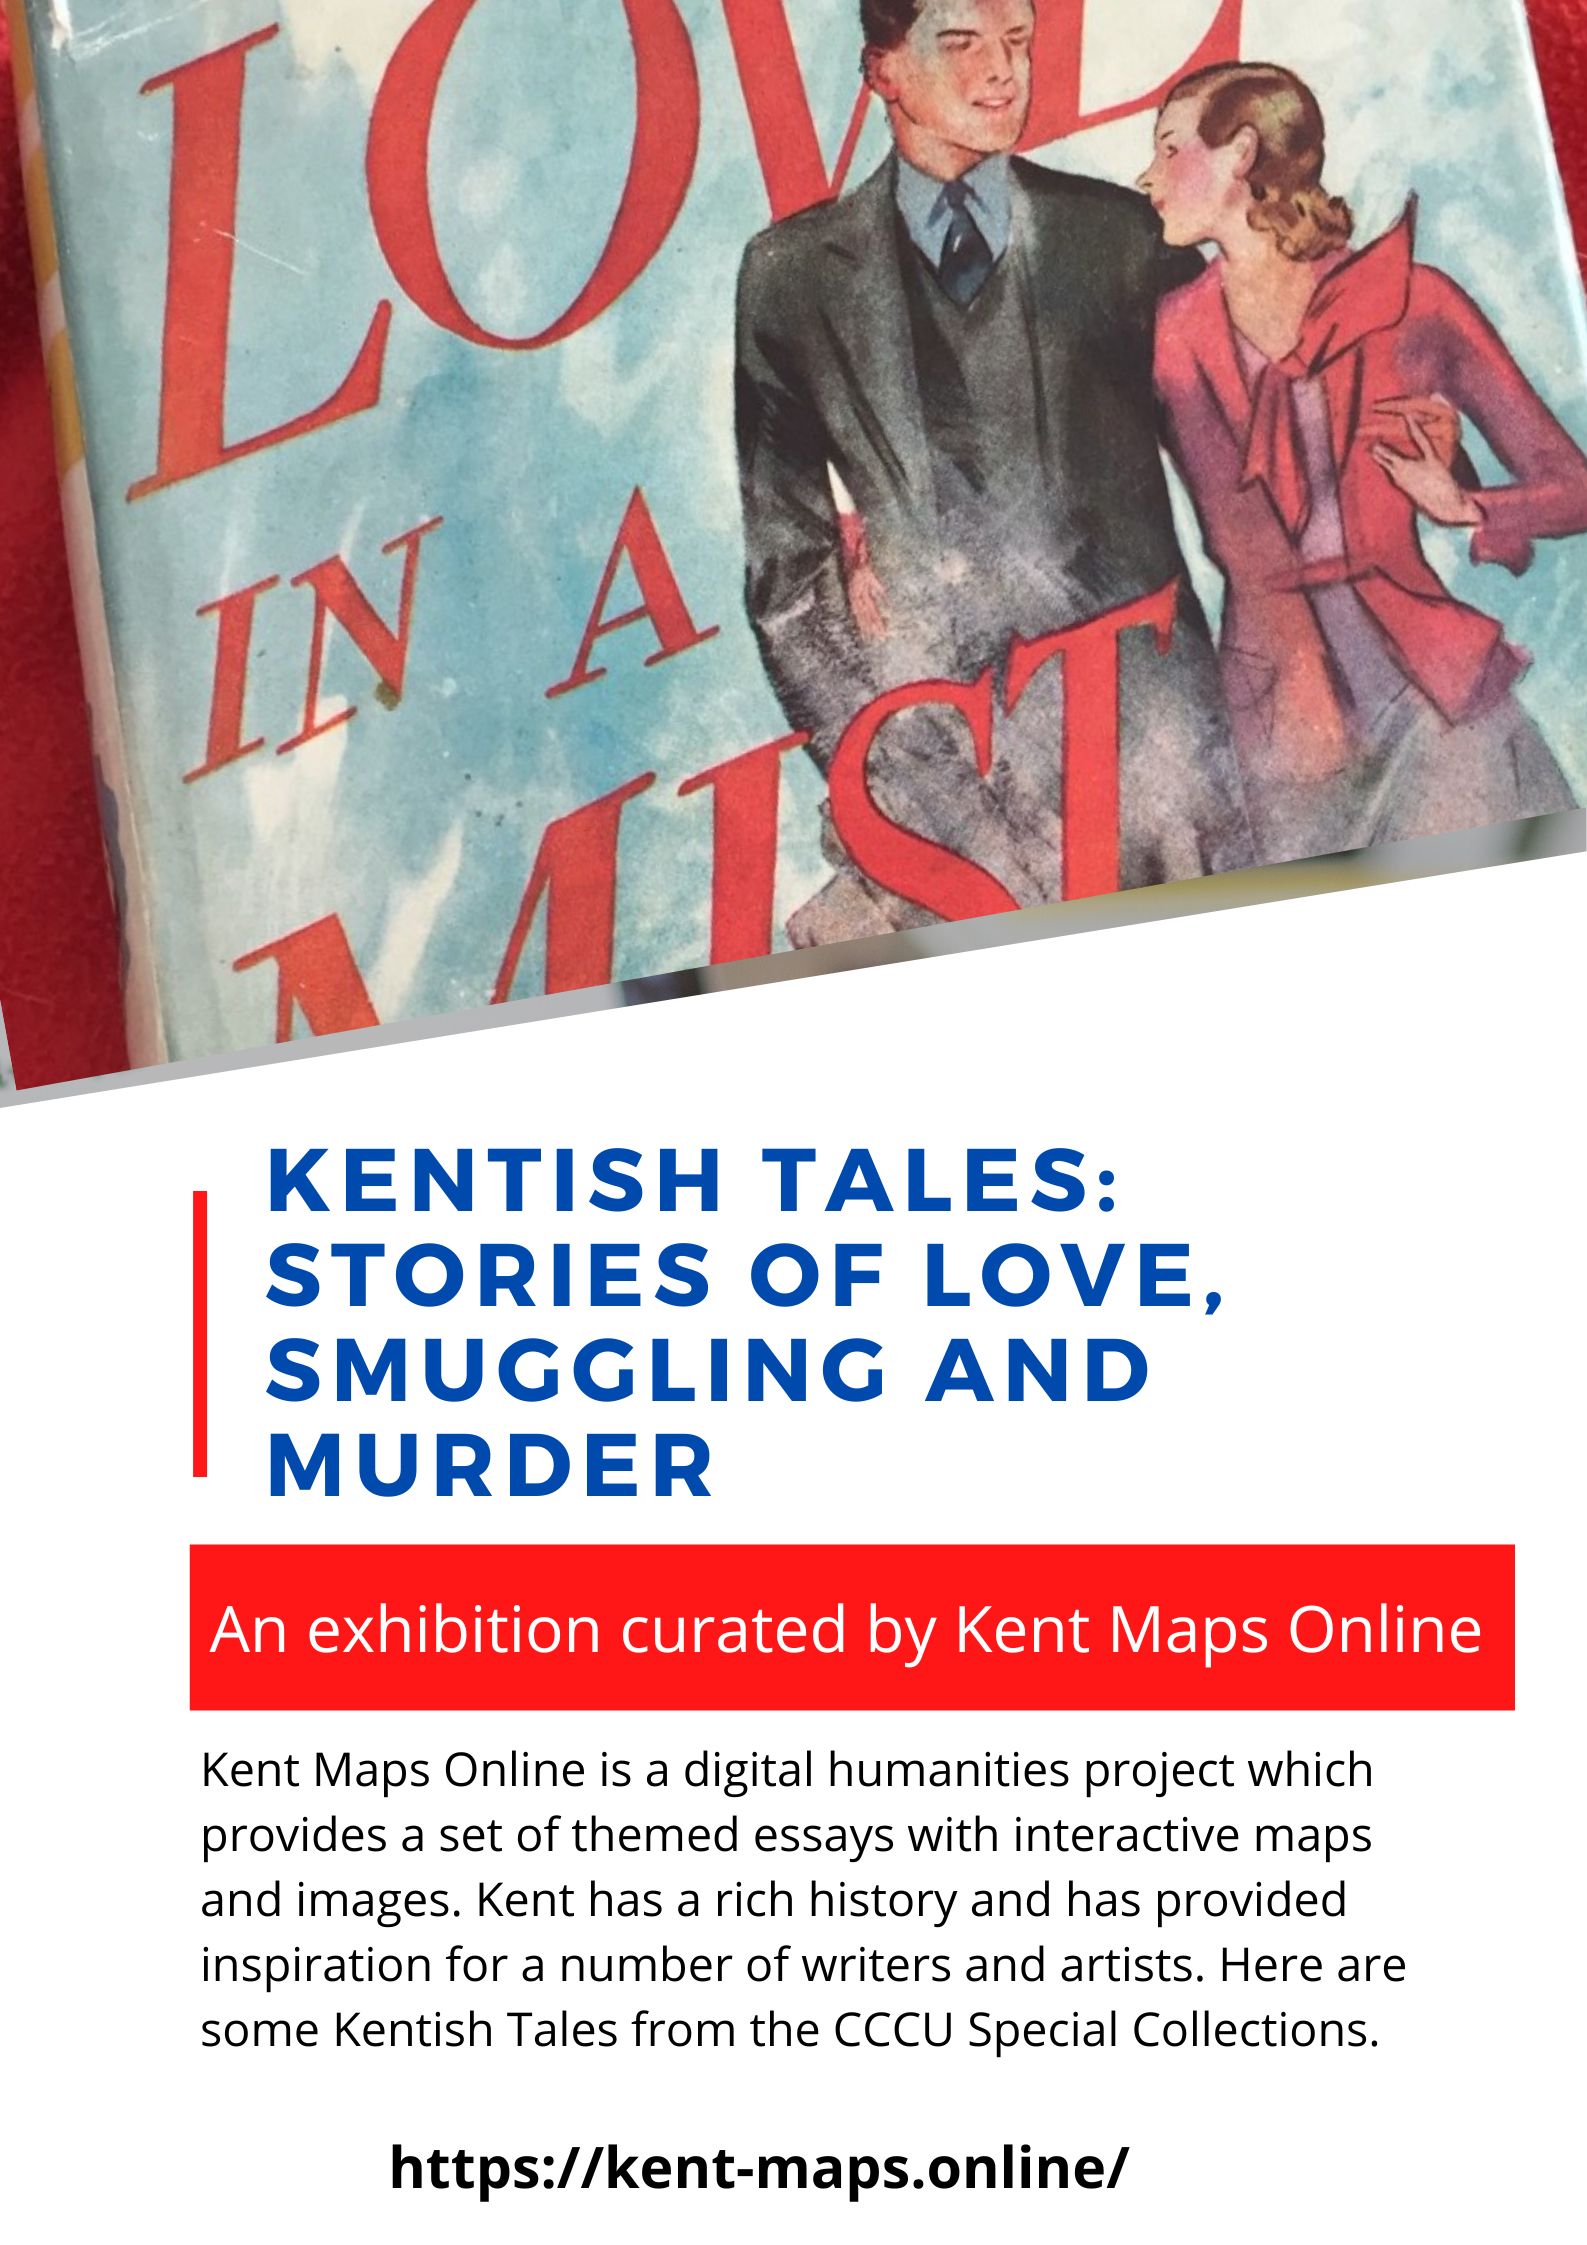 Kentish Tales: stories of love, smuggling and murder